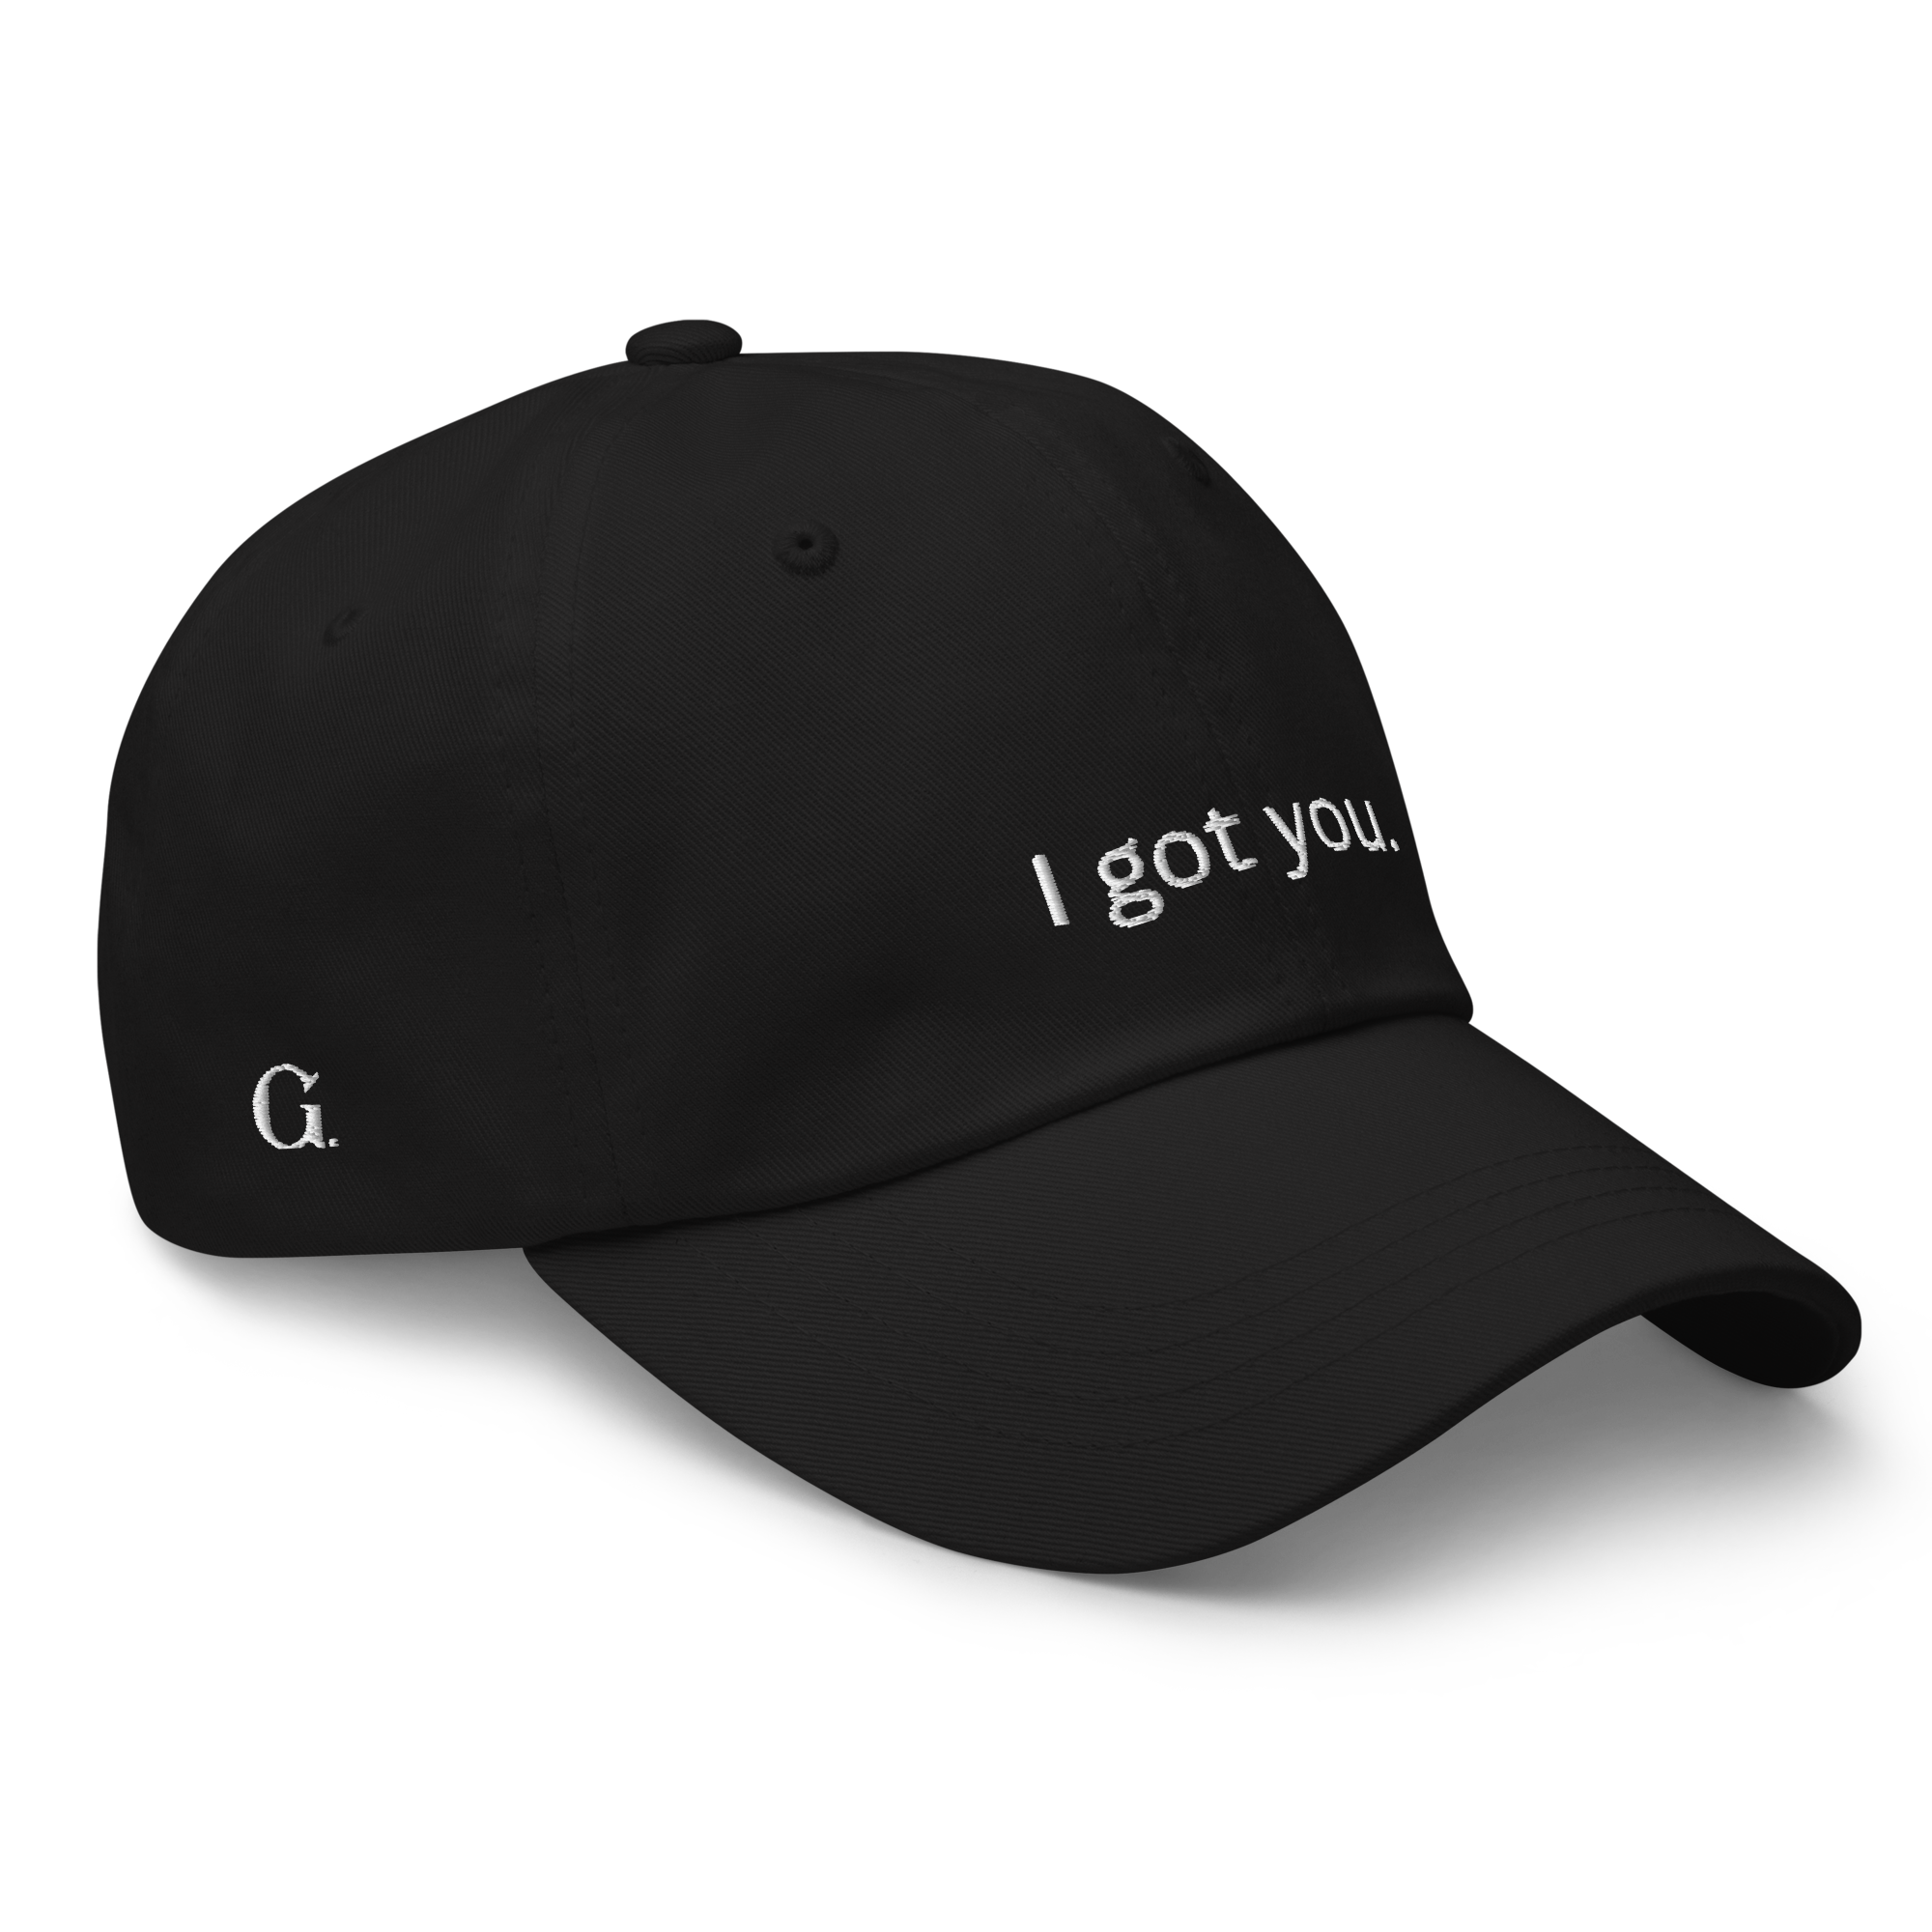 I got you dad hat right side view